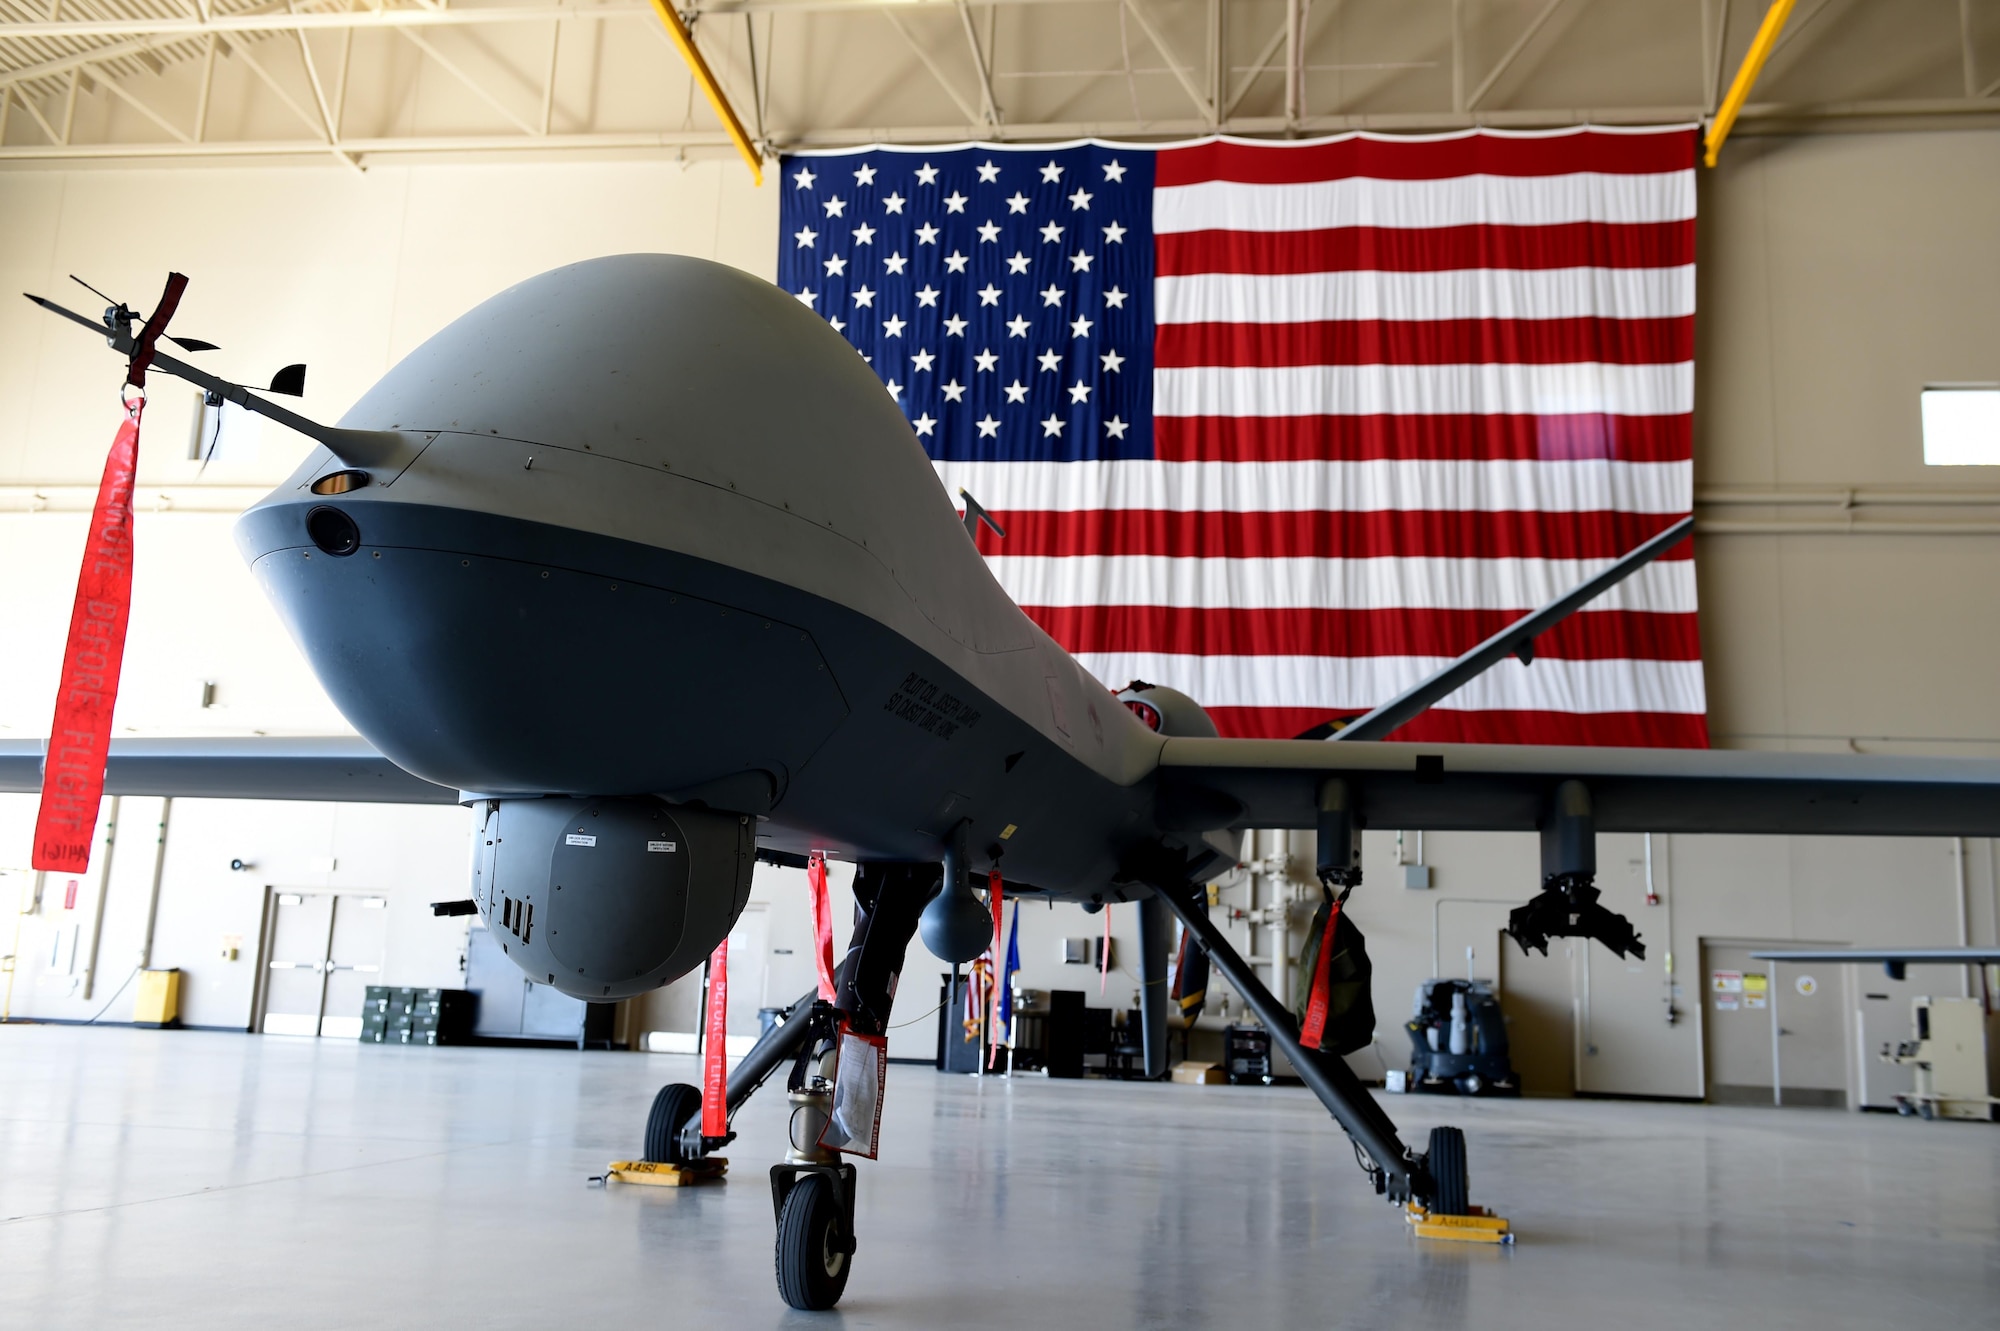 An MQ-9 Reaper stands ready to provide warfighters with persistent attack and reconnaissance to the U.S. and joint coalition partners. (U.S. Air Force photo/Airman First Class Adarius Petty)